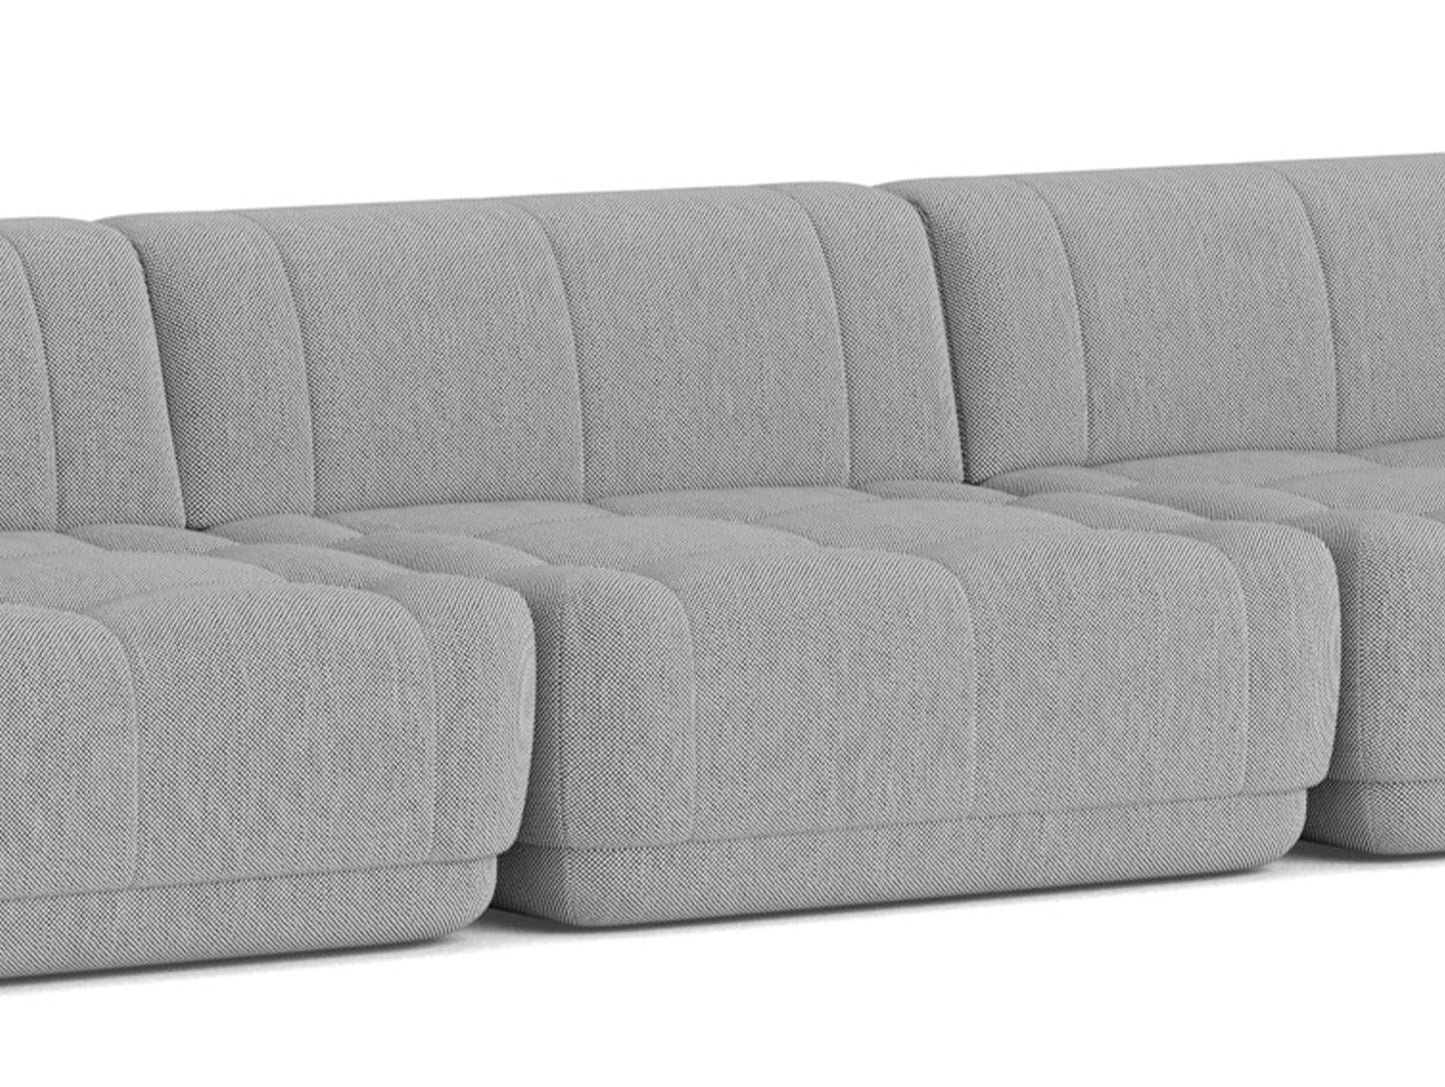 Quilton Sofa - Combination 27 by HAY / Combintion 27 / Dot 1682 02 Bianco/Nero